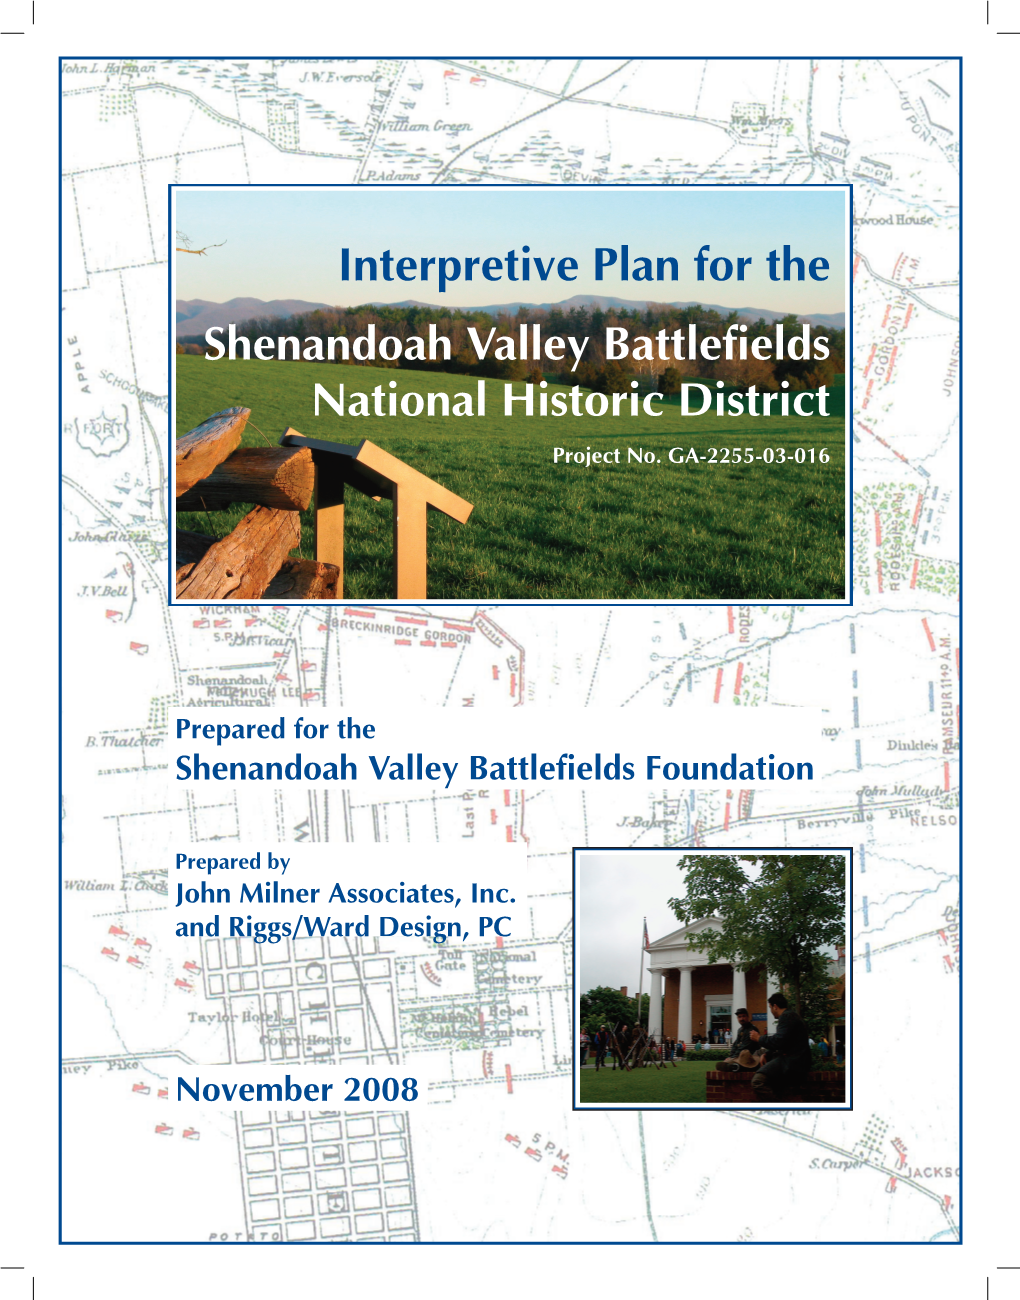 Interpretive Plan for the Shenandoah Valley Battlefields National Historic District Project No